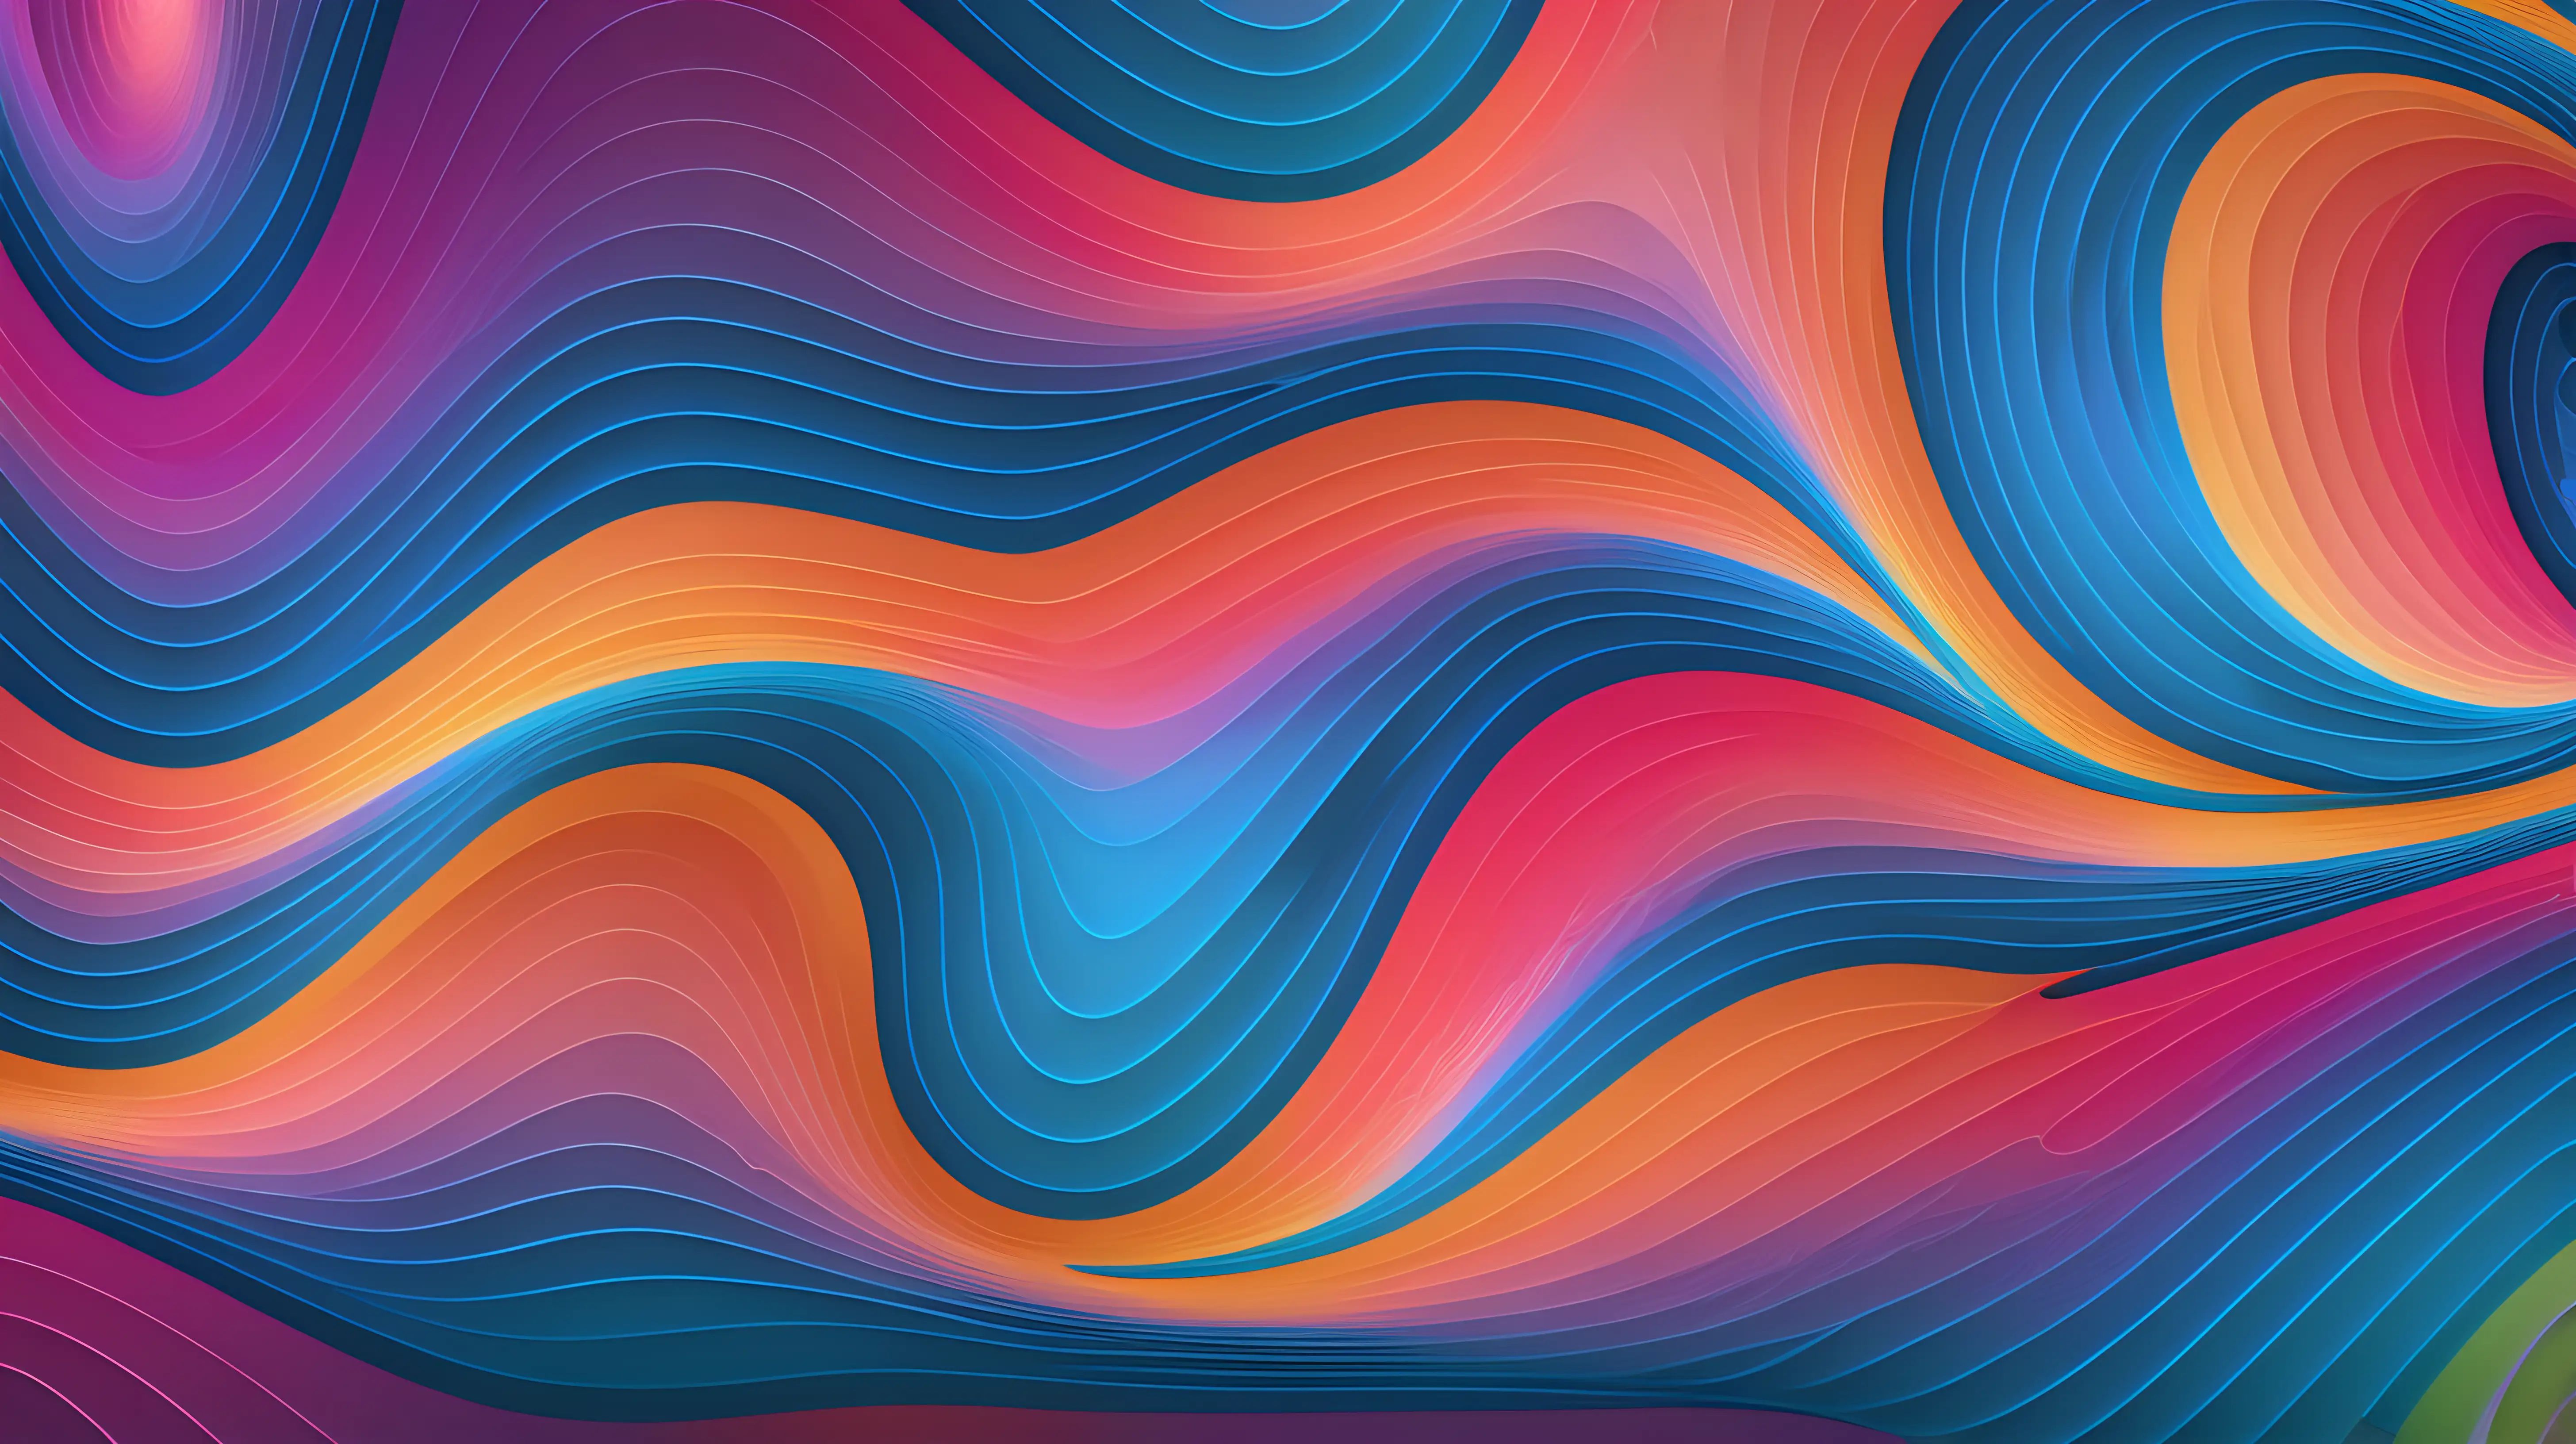 Multidimensional Waves of Color Illustrating Interwoven Dimensions